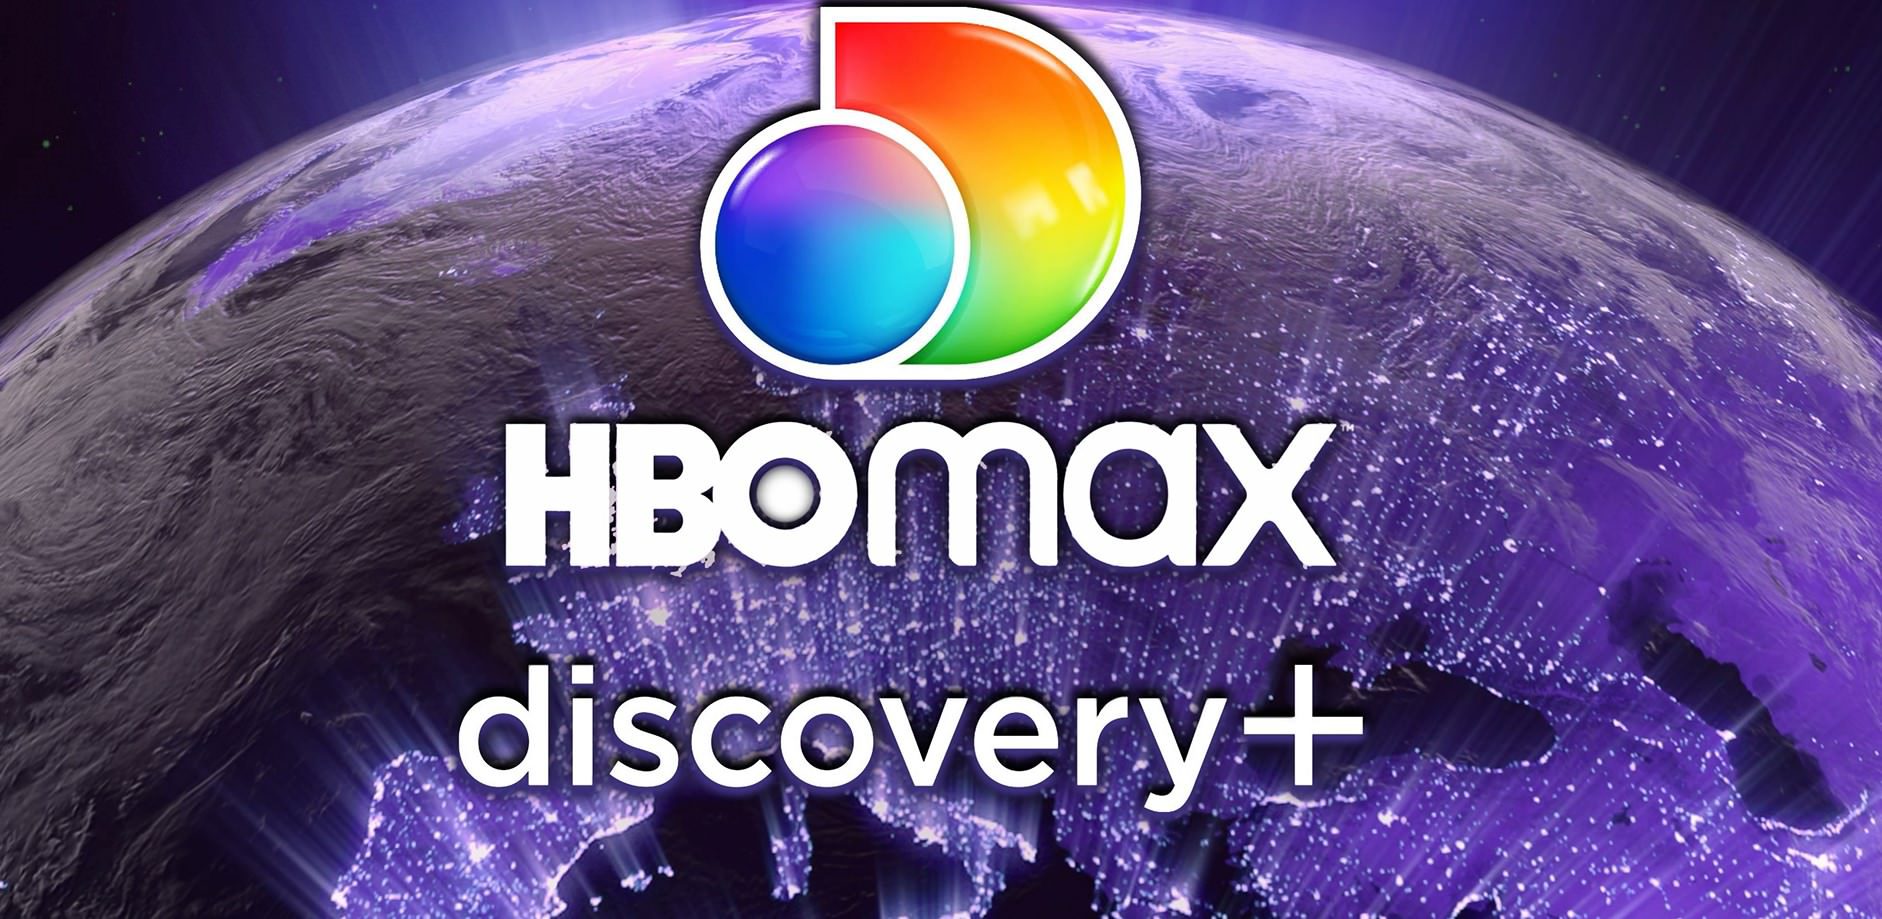 YT Scrn HBO Discovery +